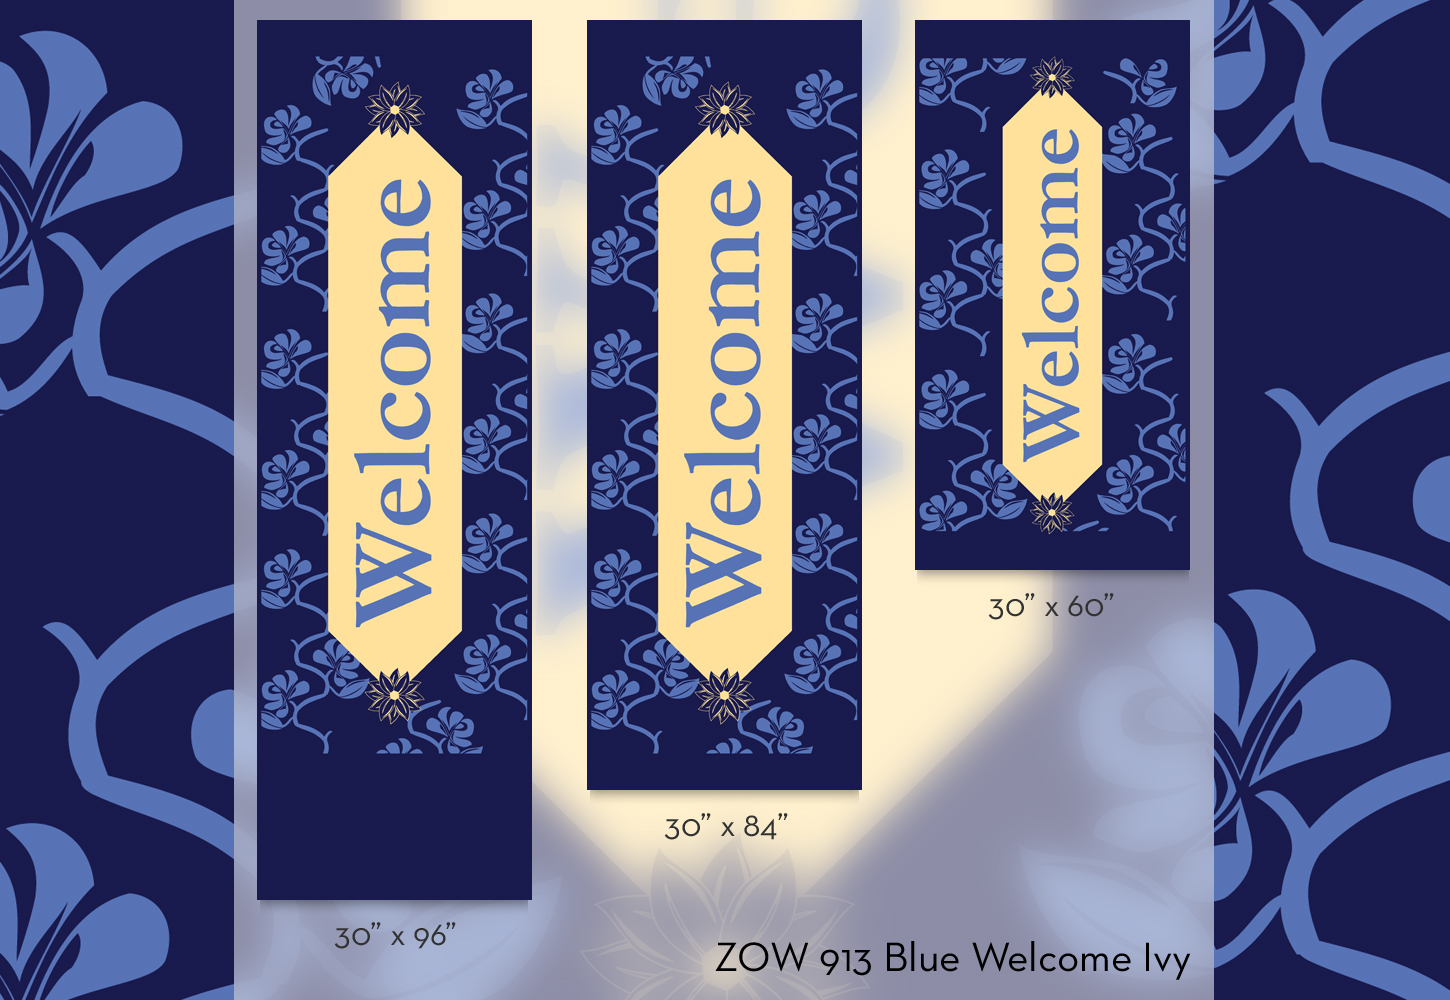 ZOW 913B Blue Welcome Ivy